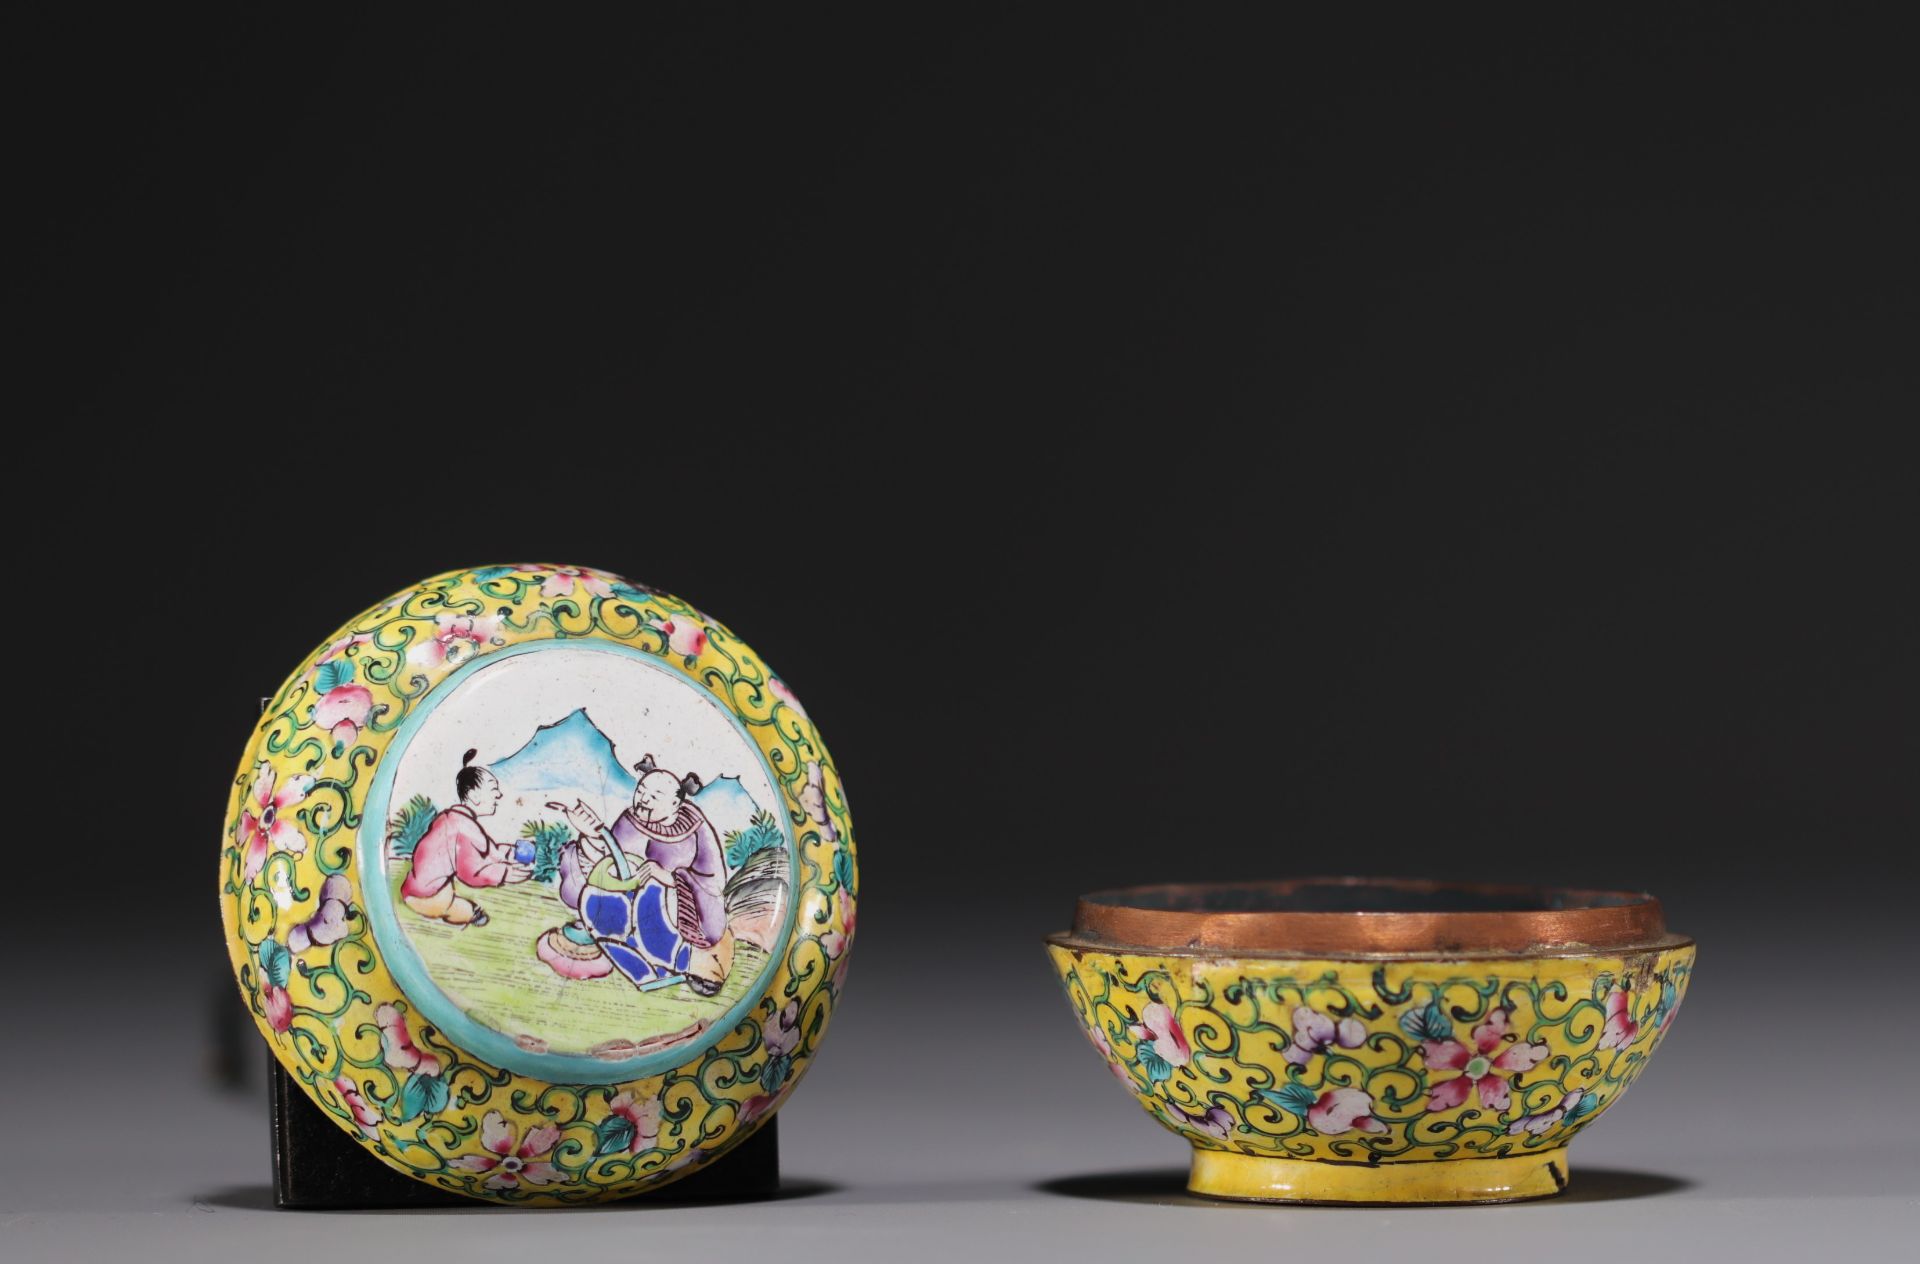 China - Cloisonne enamel box with figures, Canton, 18th-19th century. - Image 2 of 3